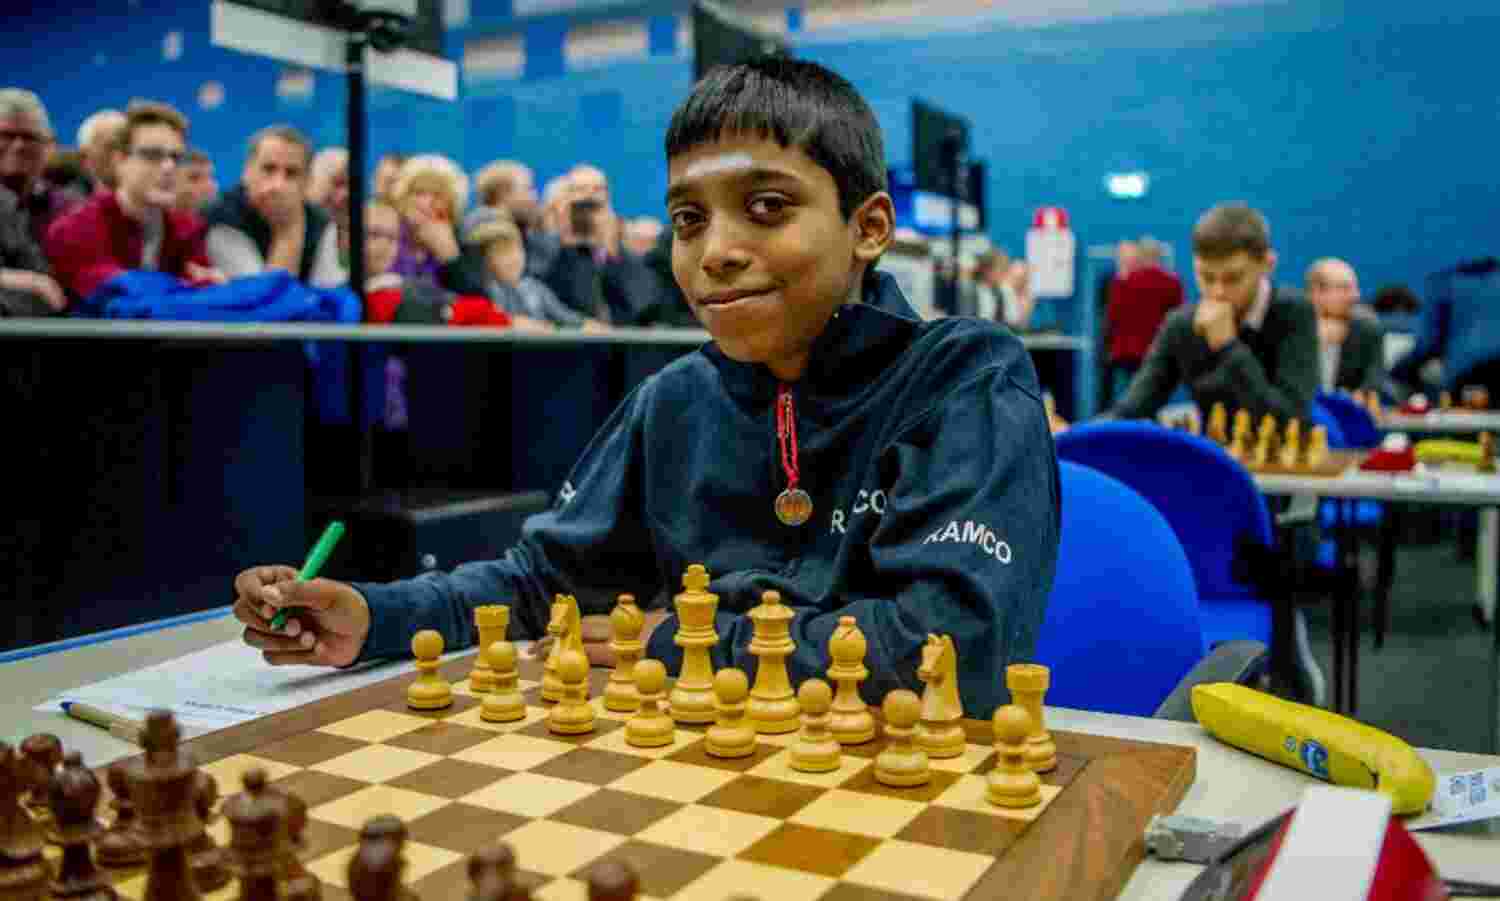 What He Brings To The Table Is His Fearlessness: Viswanathan Anand On  Chess Prodigy Praggnanandhaa To NDTV